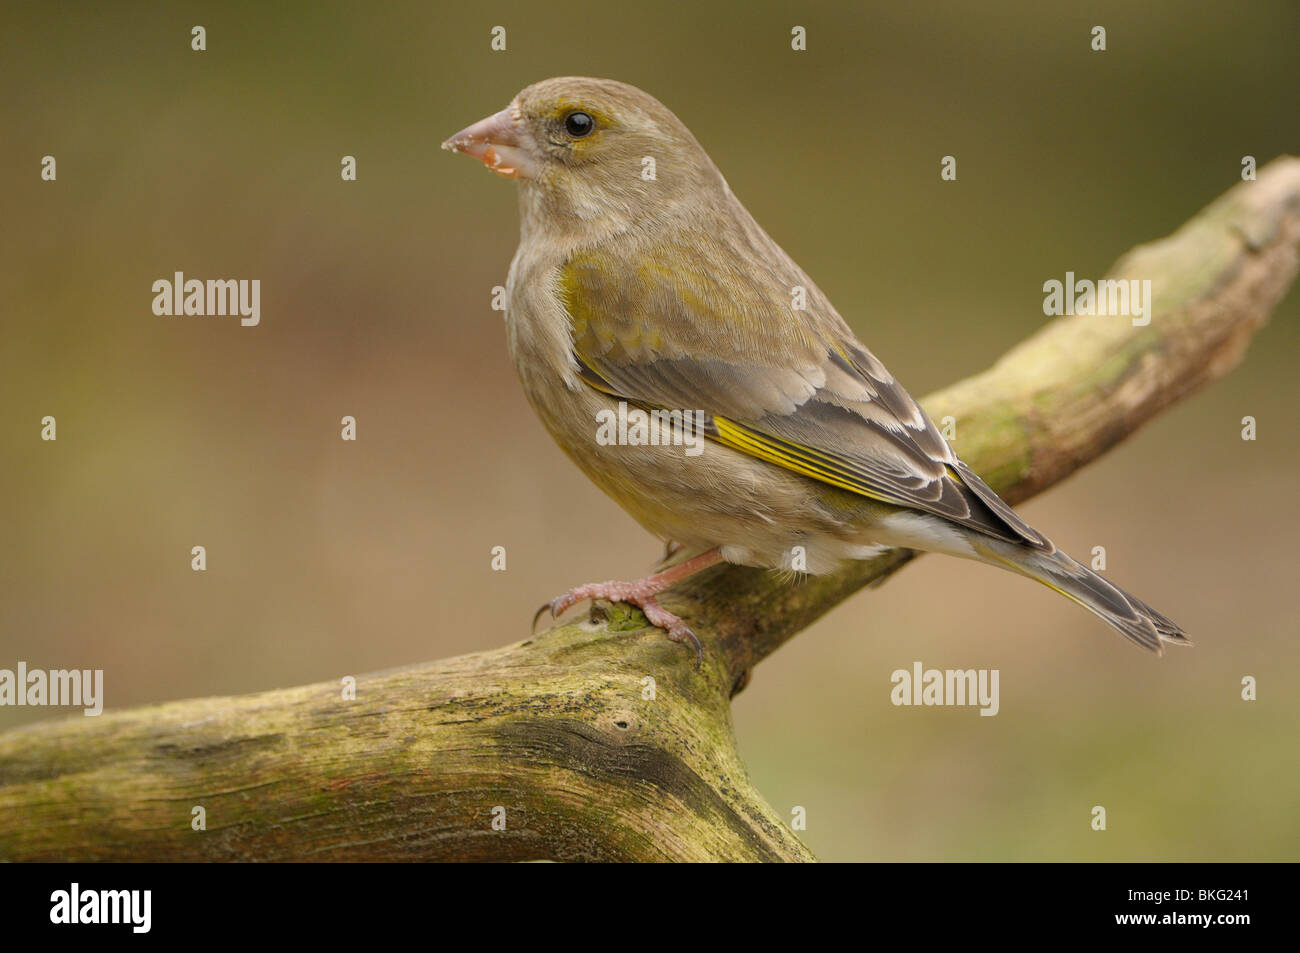 Female Greenfinch on dead branch Stock Photo